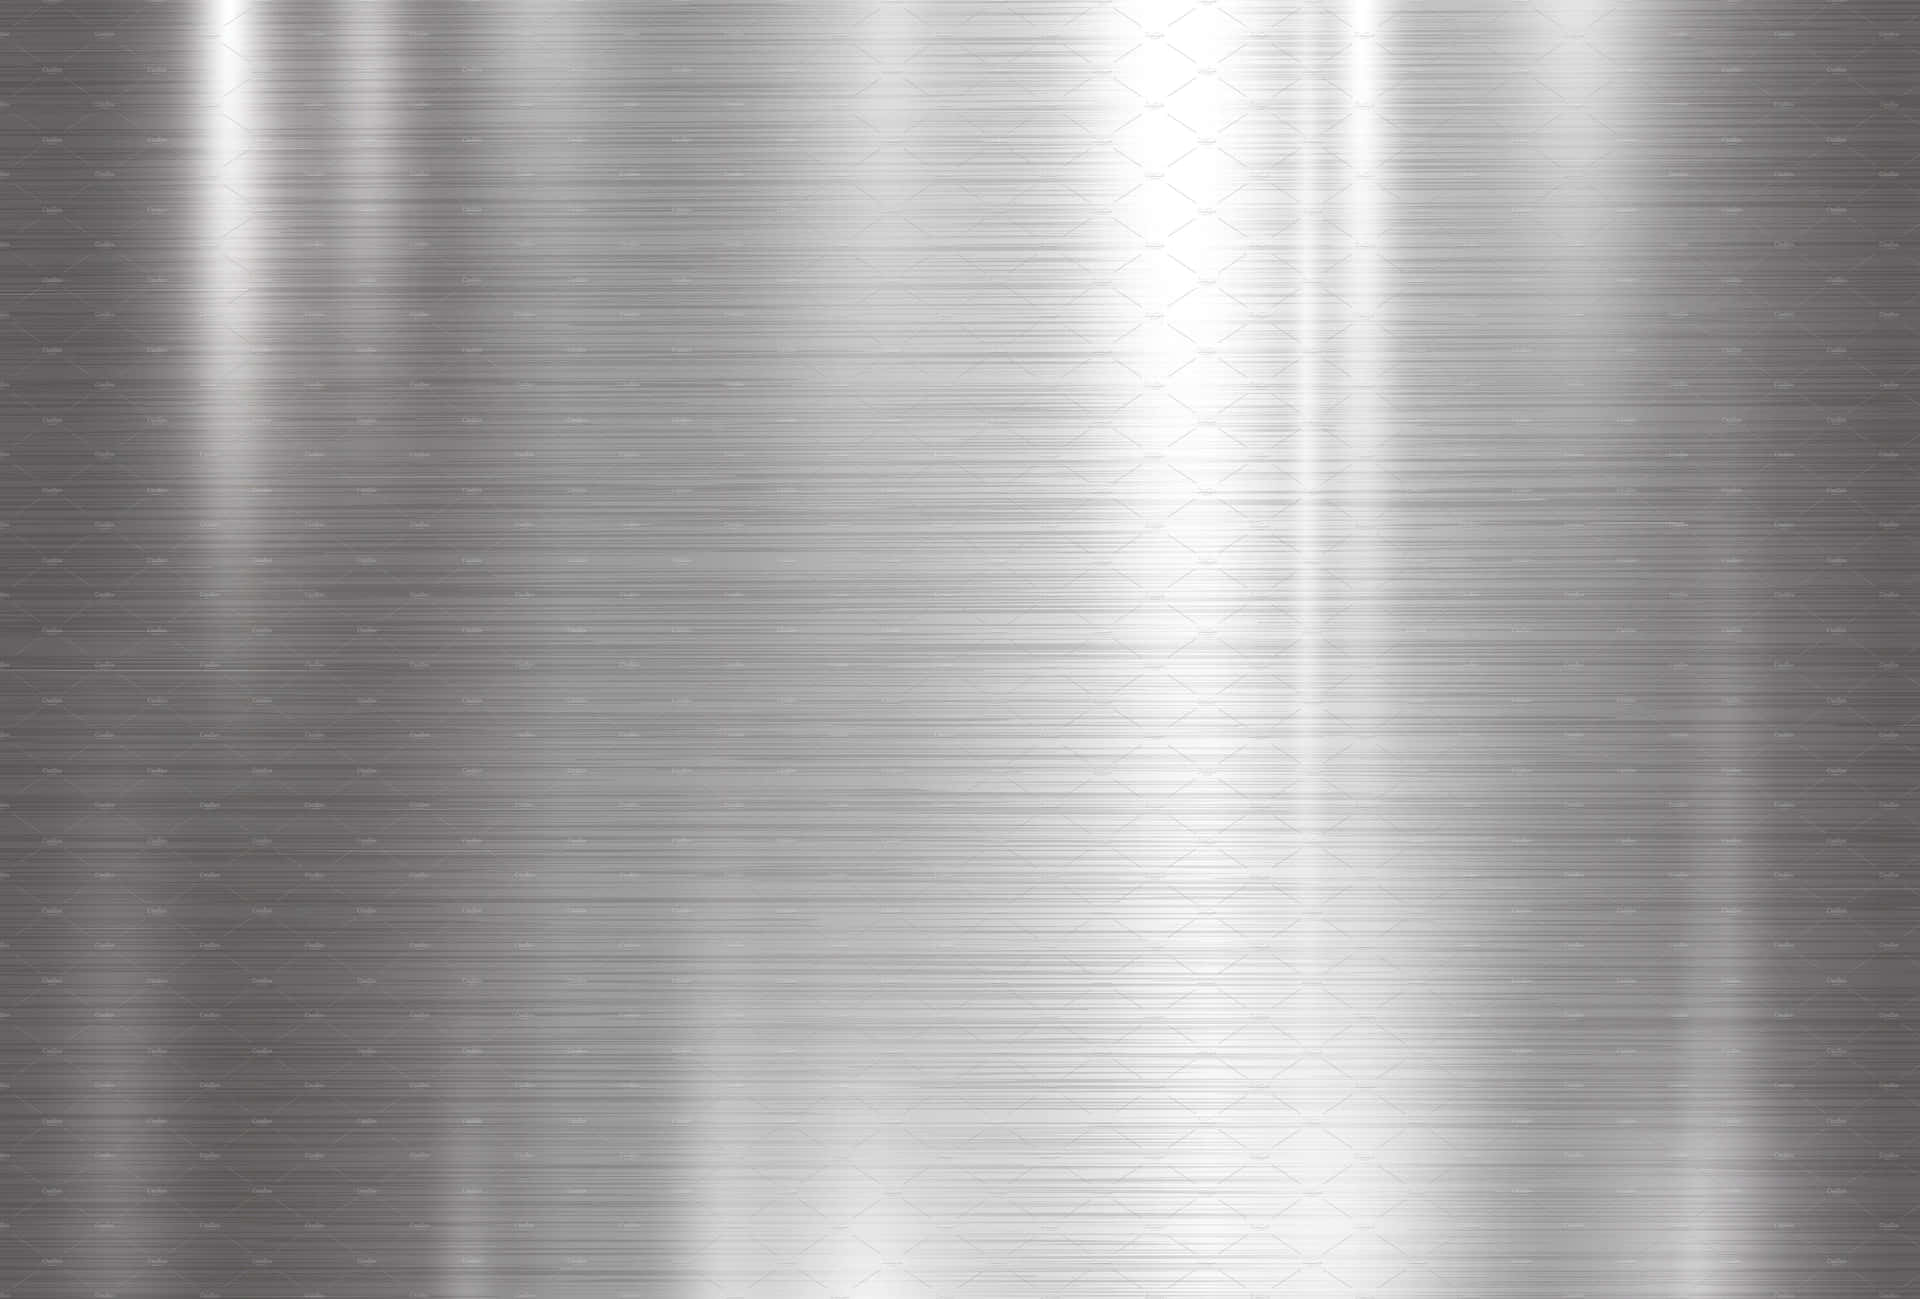 Metal silver steel texture background, shiny brushed metallic